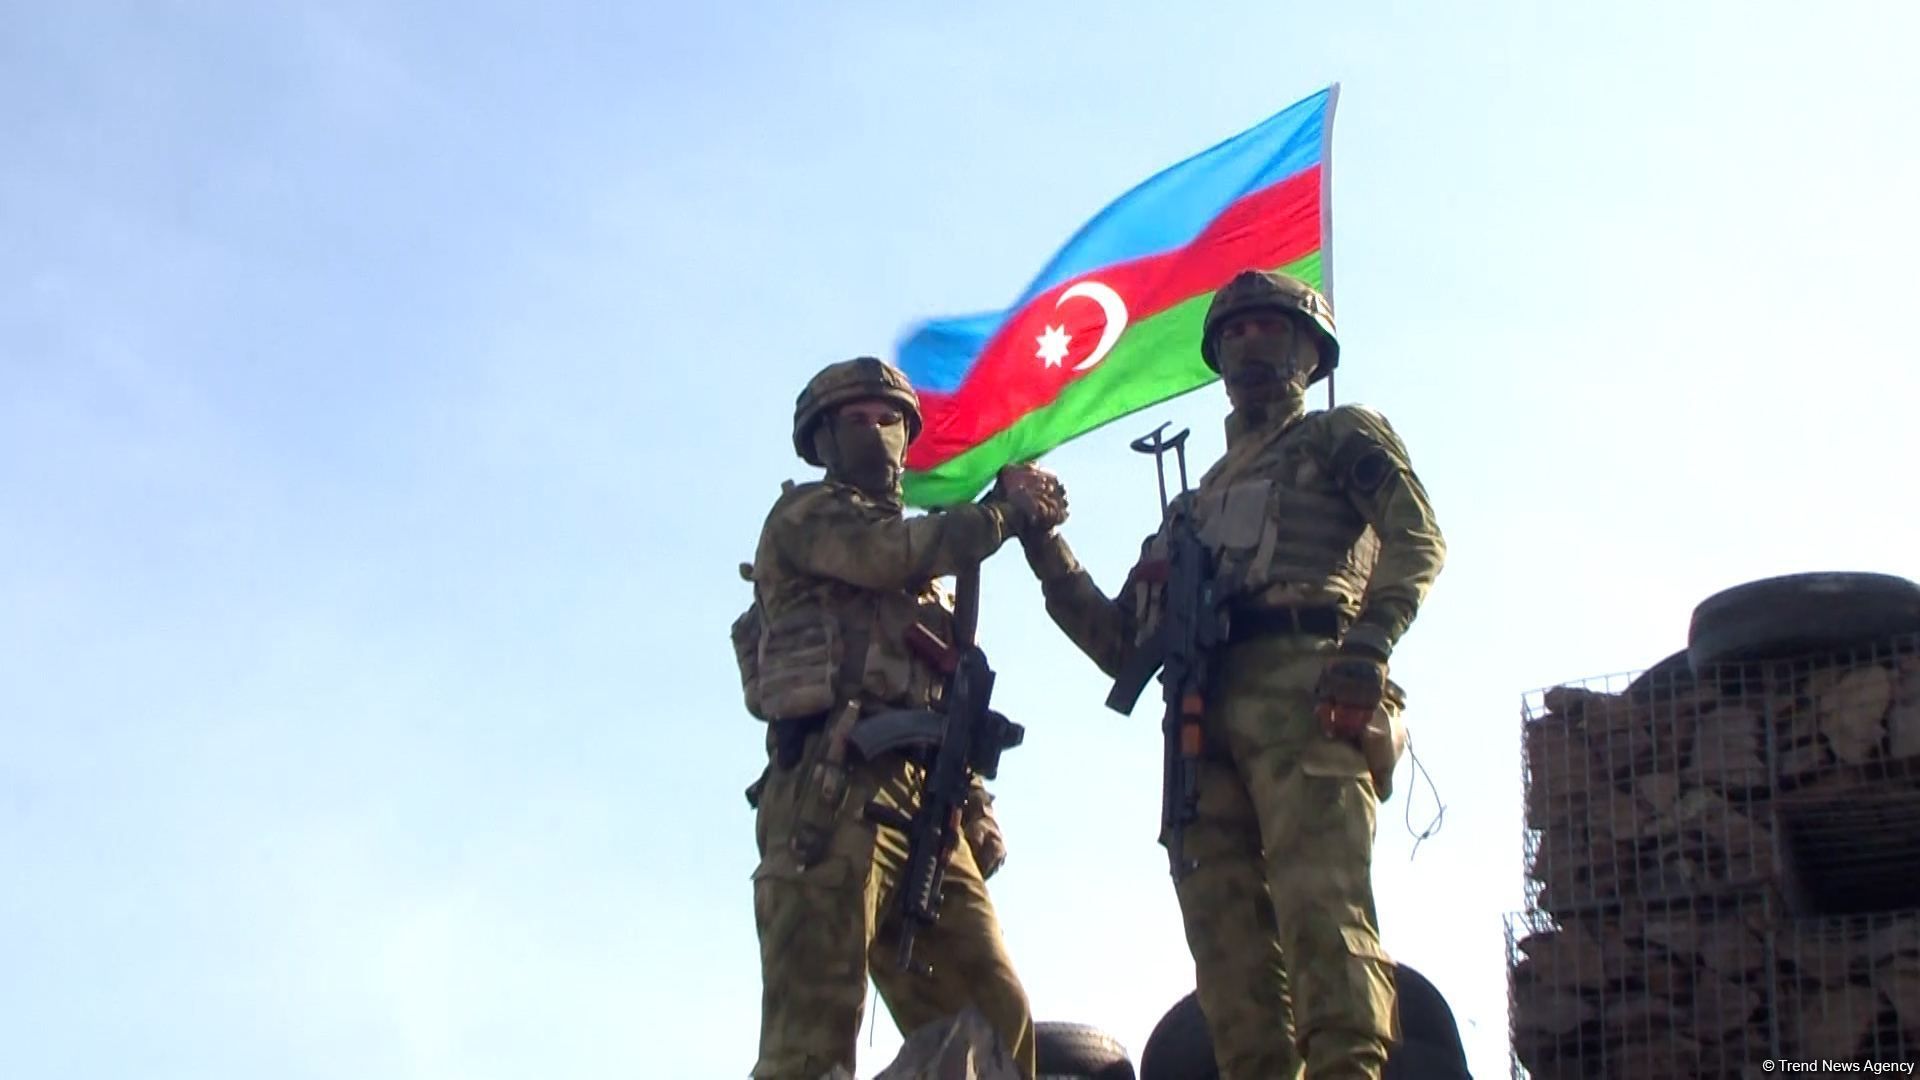 All our military operations were lightning-fast - Azerbaijani border guards [PHOTO/VIDEO]